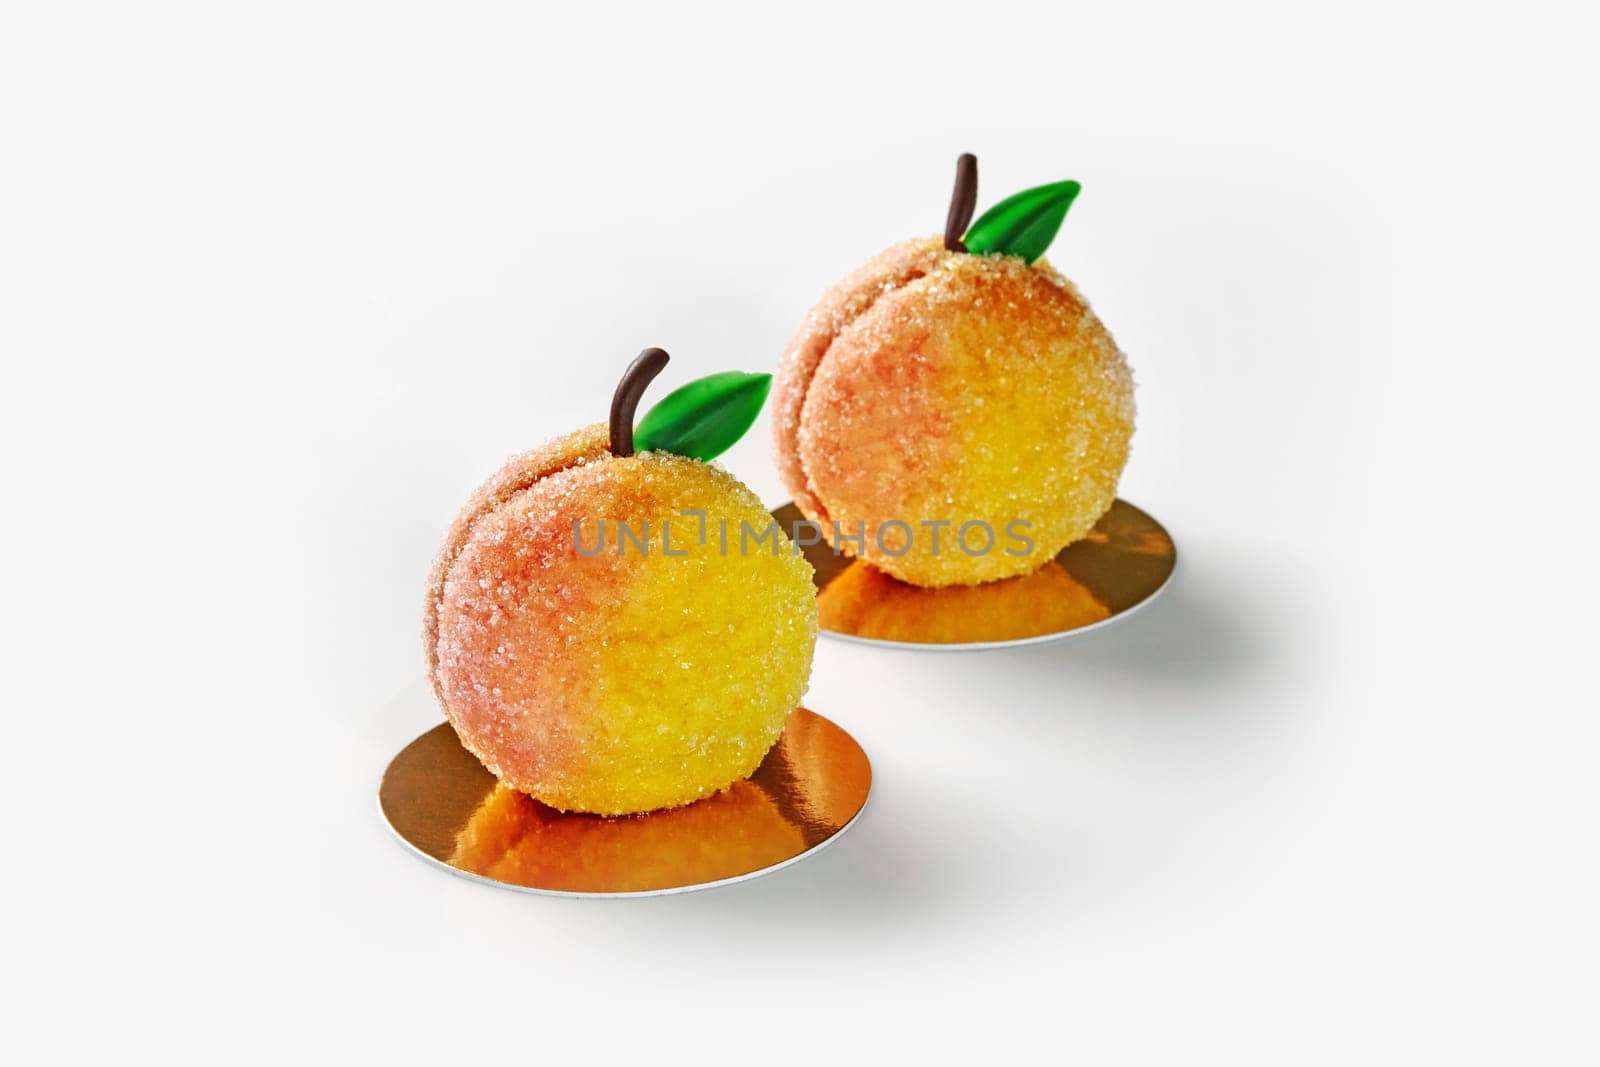 Two appetizing, dusted with sugar peach-shaped pastries with creamy mousse and pistachio sponge cake on golden cardboards against white background. Collections of signature handmade desserts